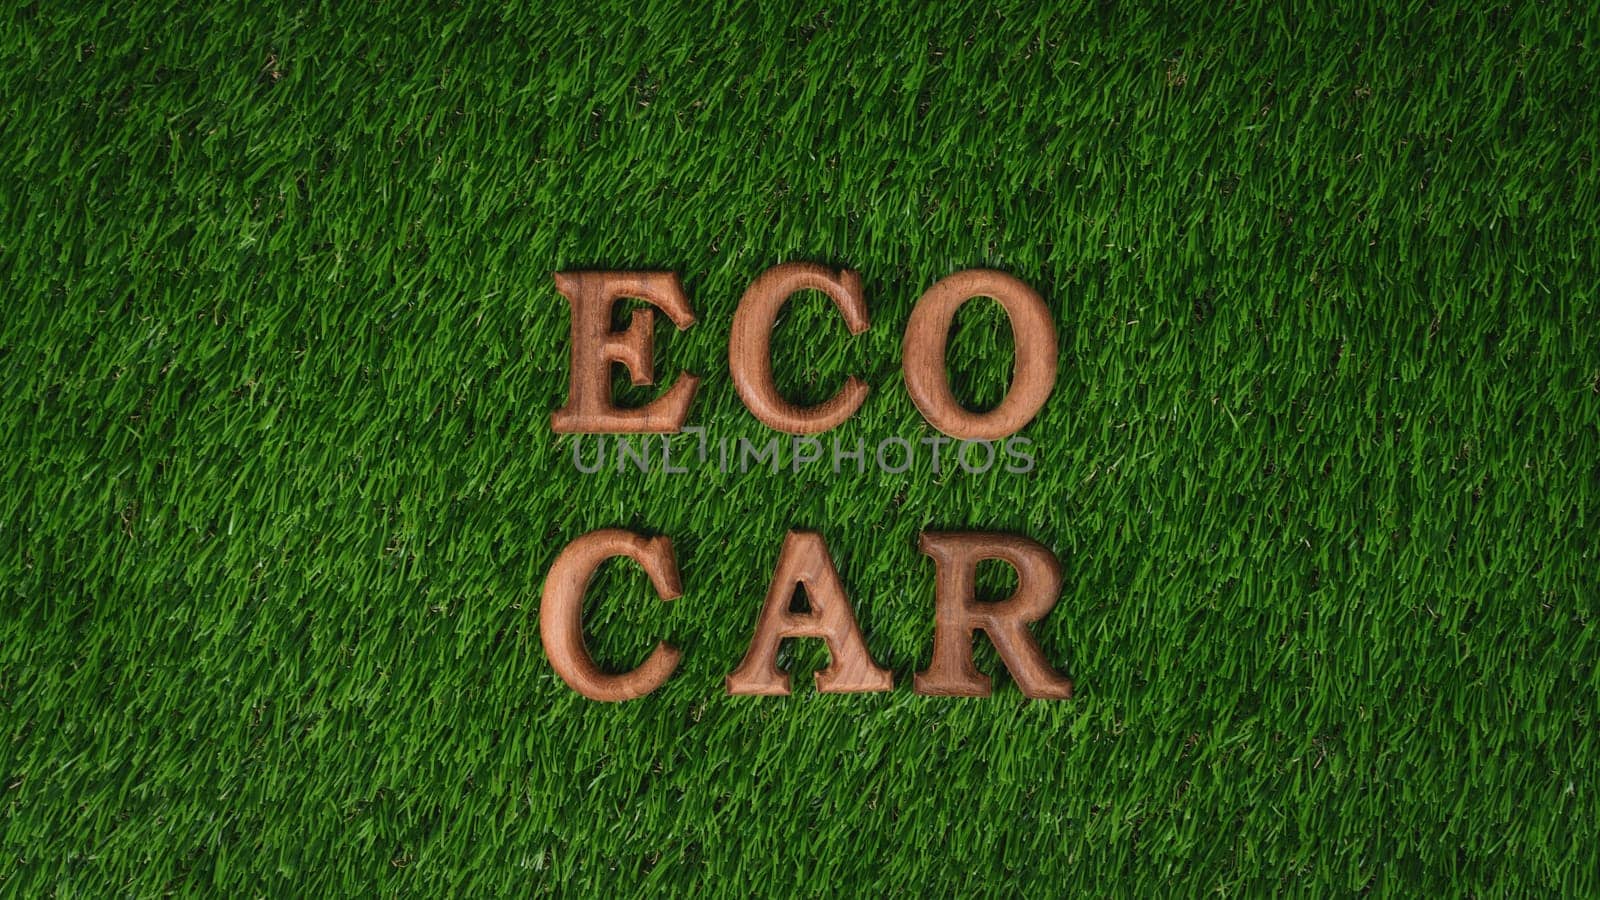 Arranged eco-friendly car and electric vehicle message as backdrop for encouraging campaign promoting environmental friendly transportation with net-zero emission by biophilia design. Gyre